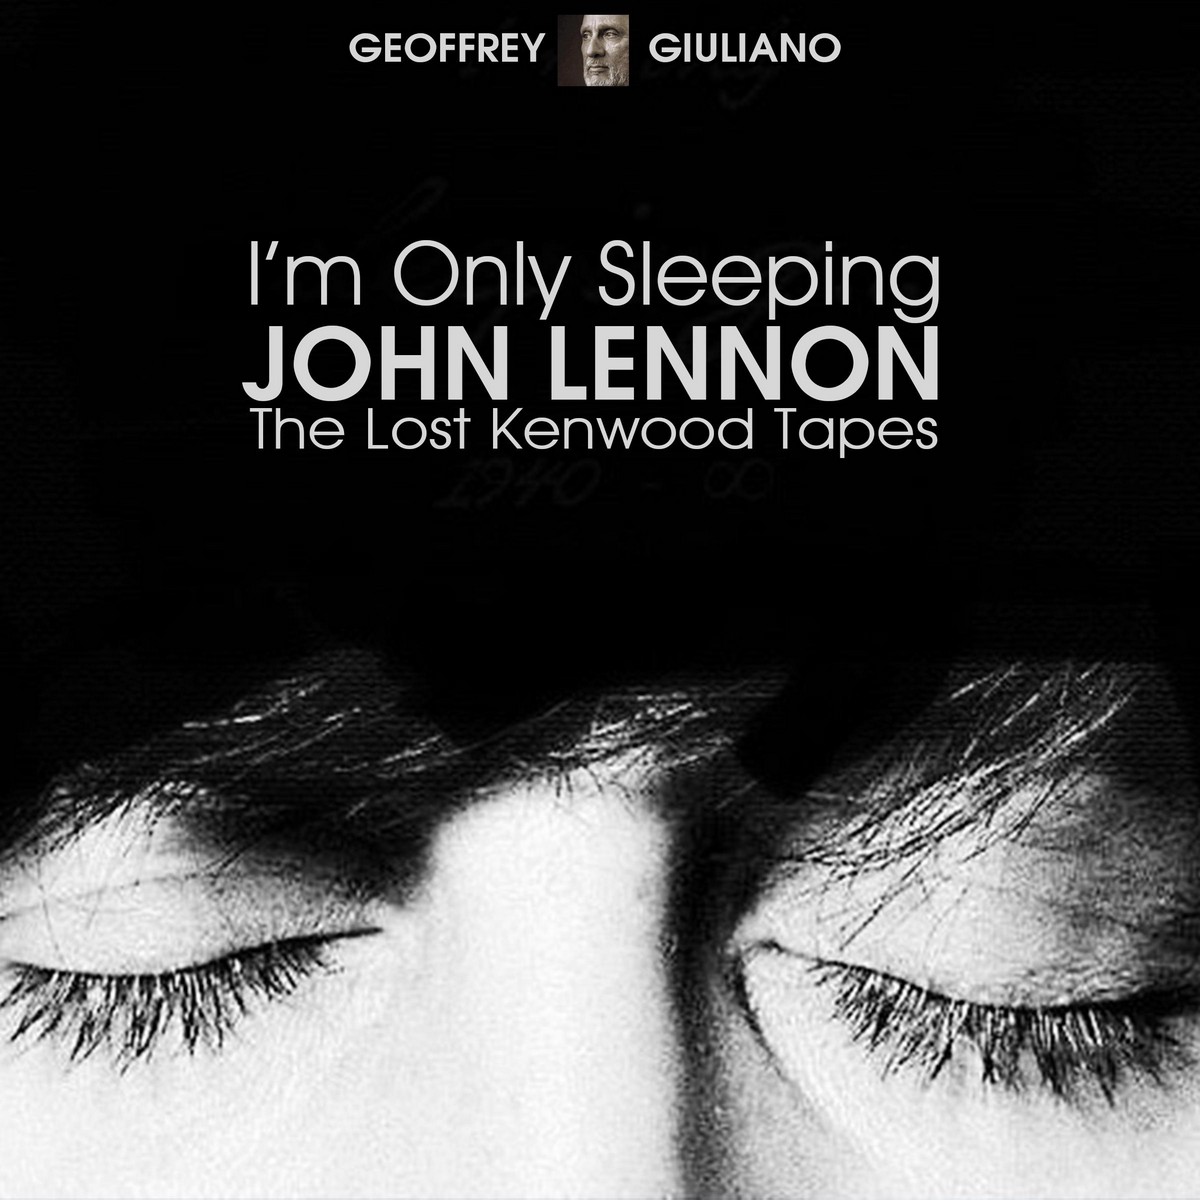 I’m Only Sleeping – John Lennon The Lost Kenwood Tapes